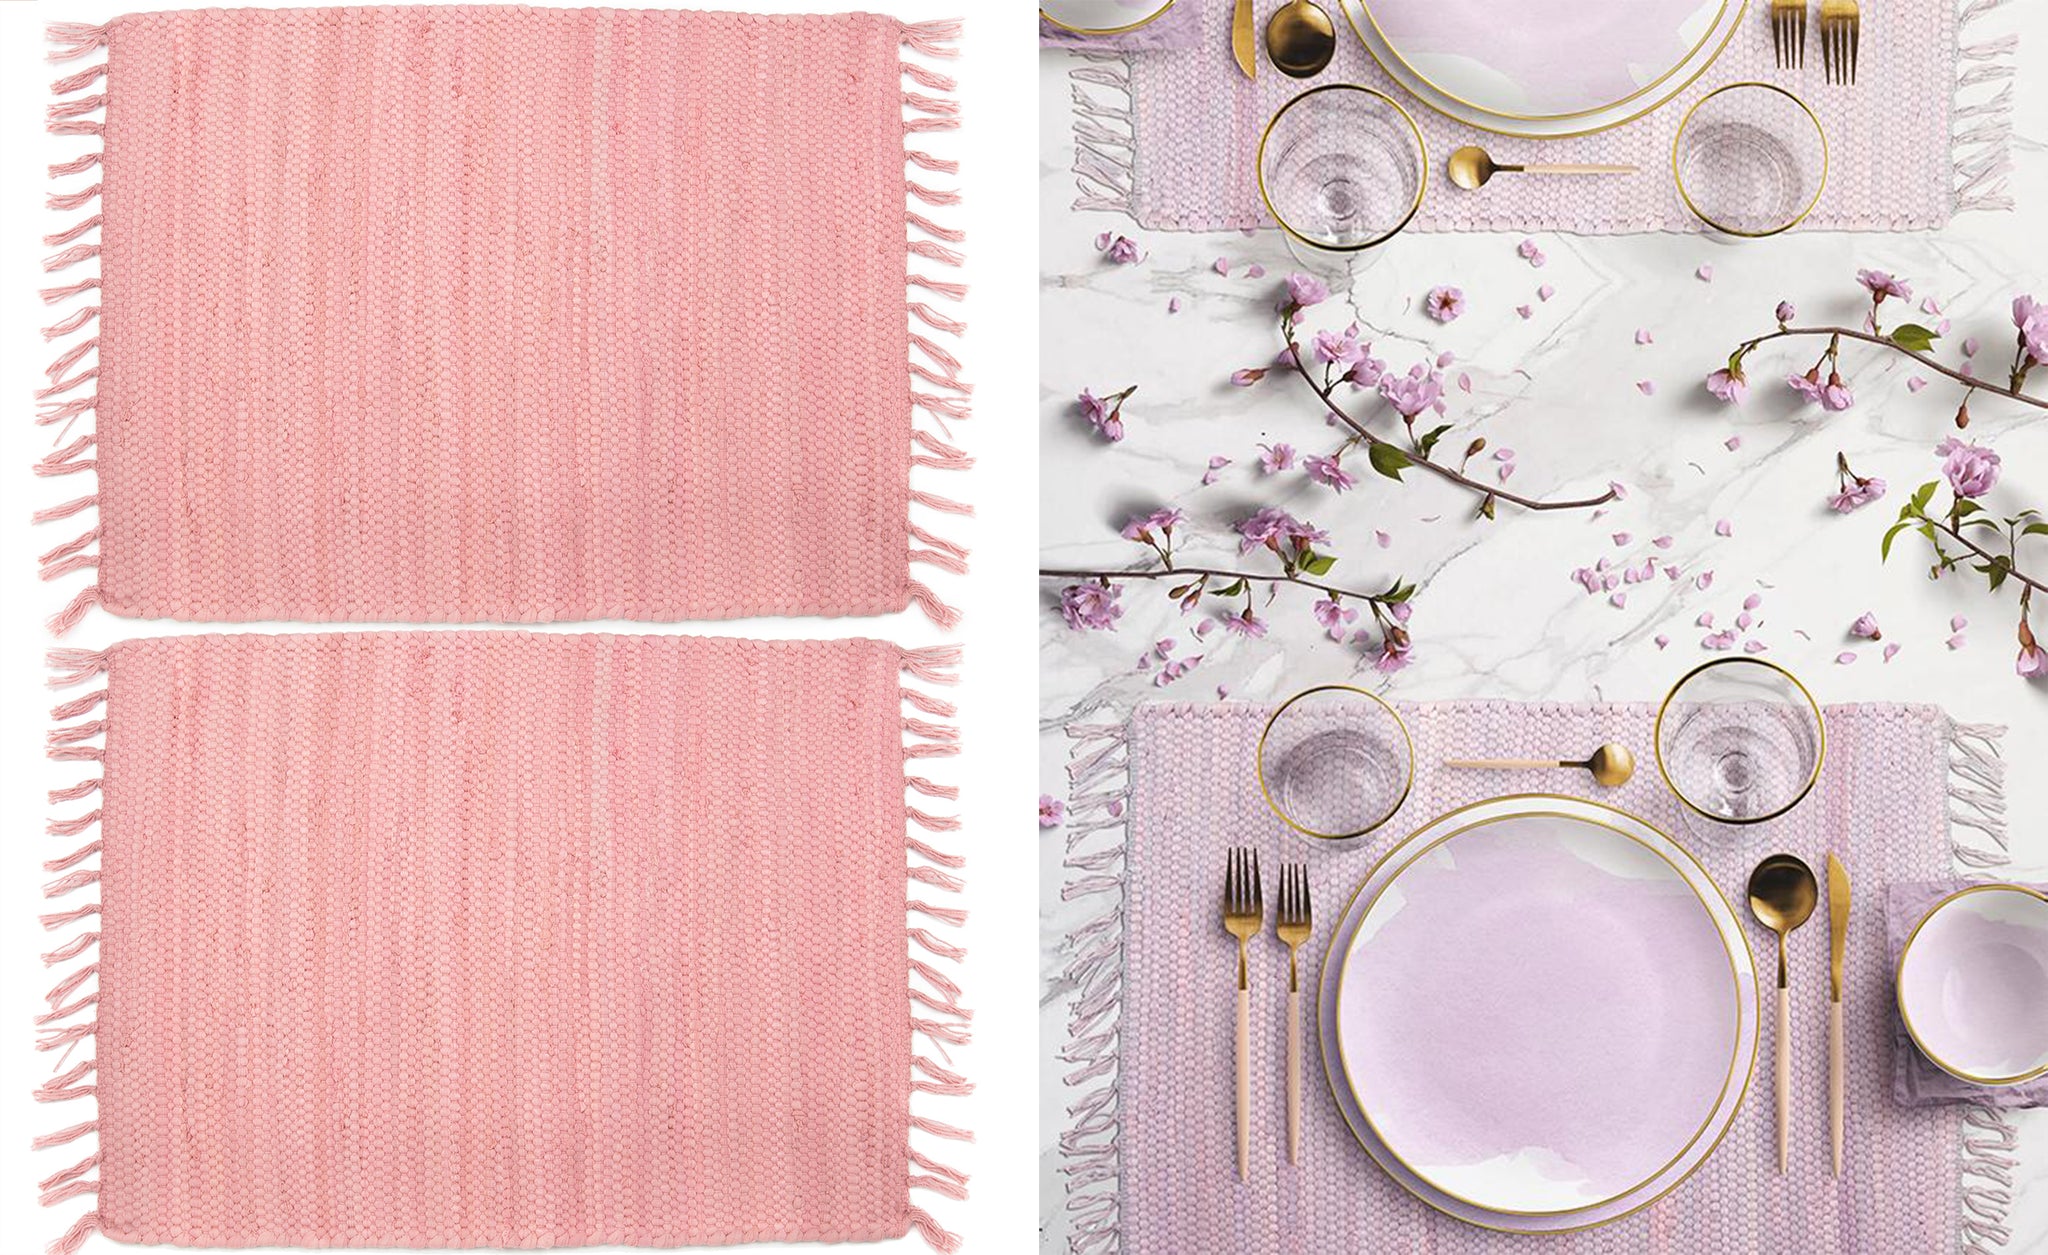 Set of 2 pink colored rug style placemats